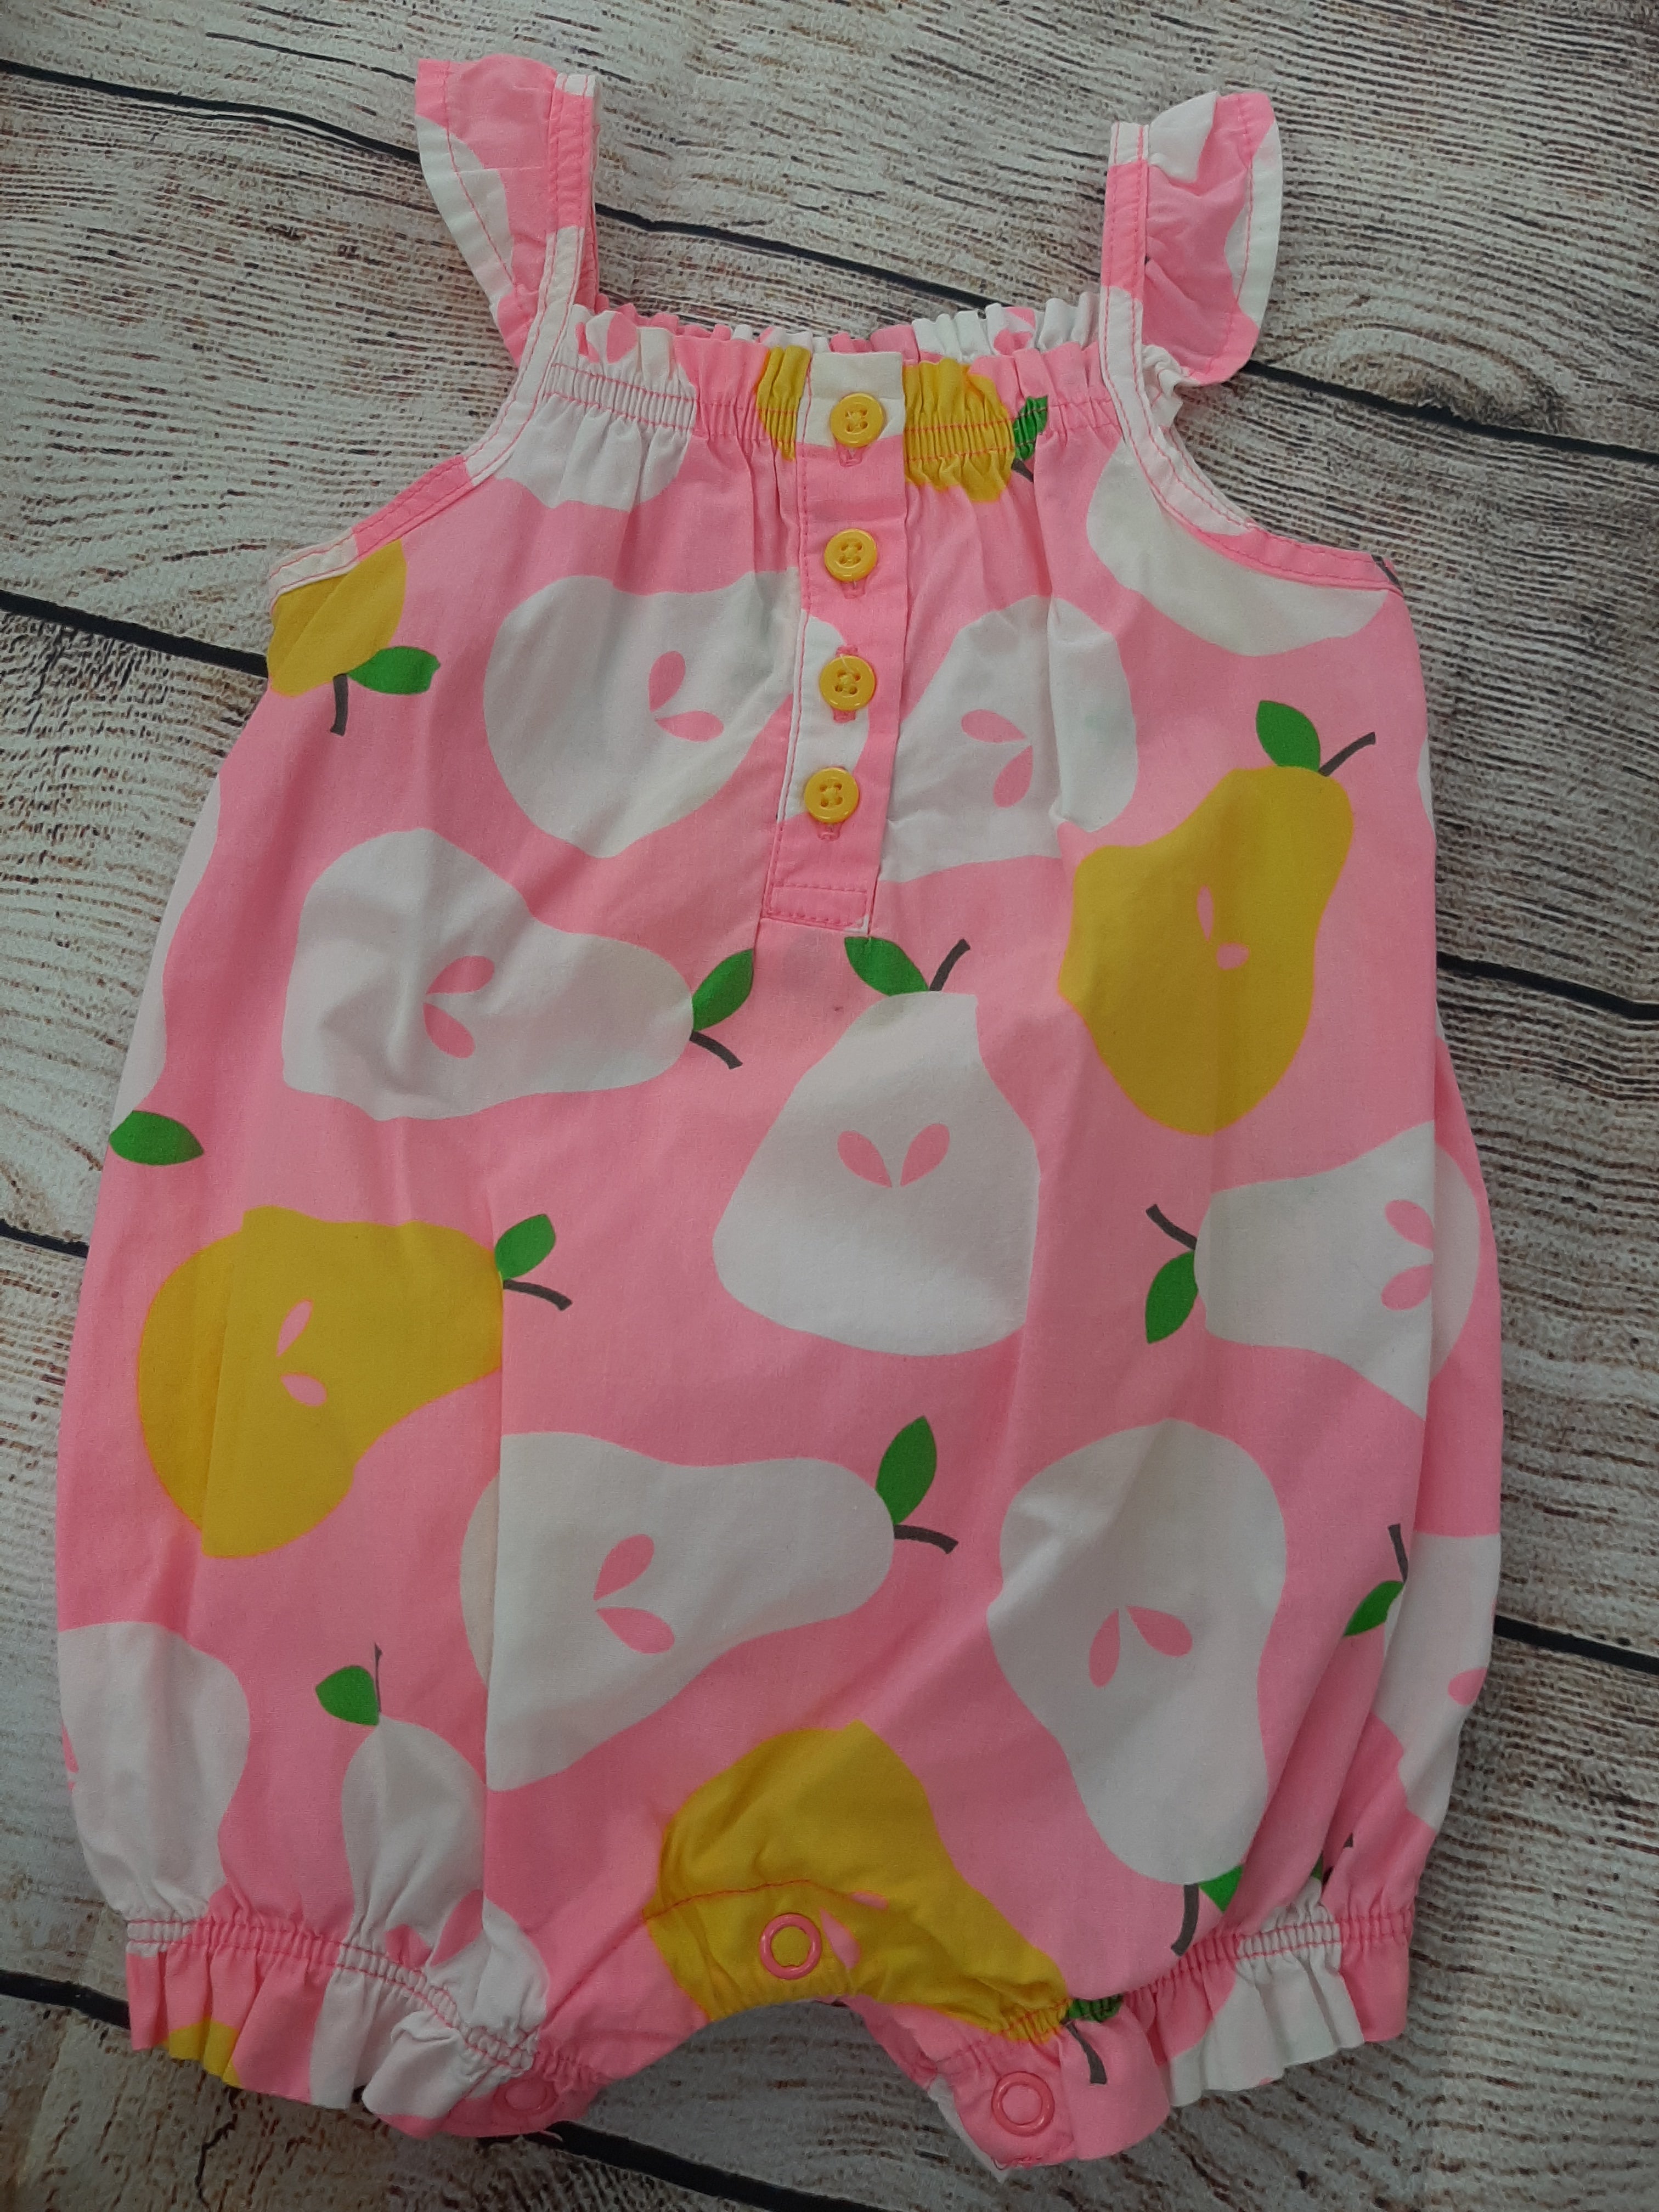 Carters Baby Girl 1pc Pear Summer Outfit sz 3mo